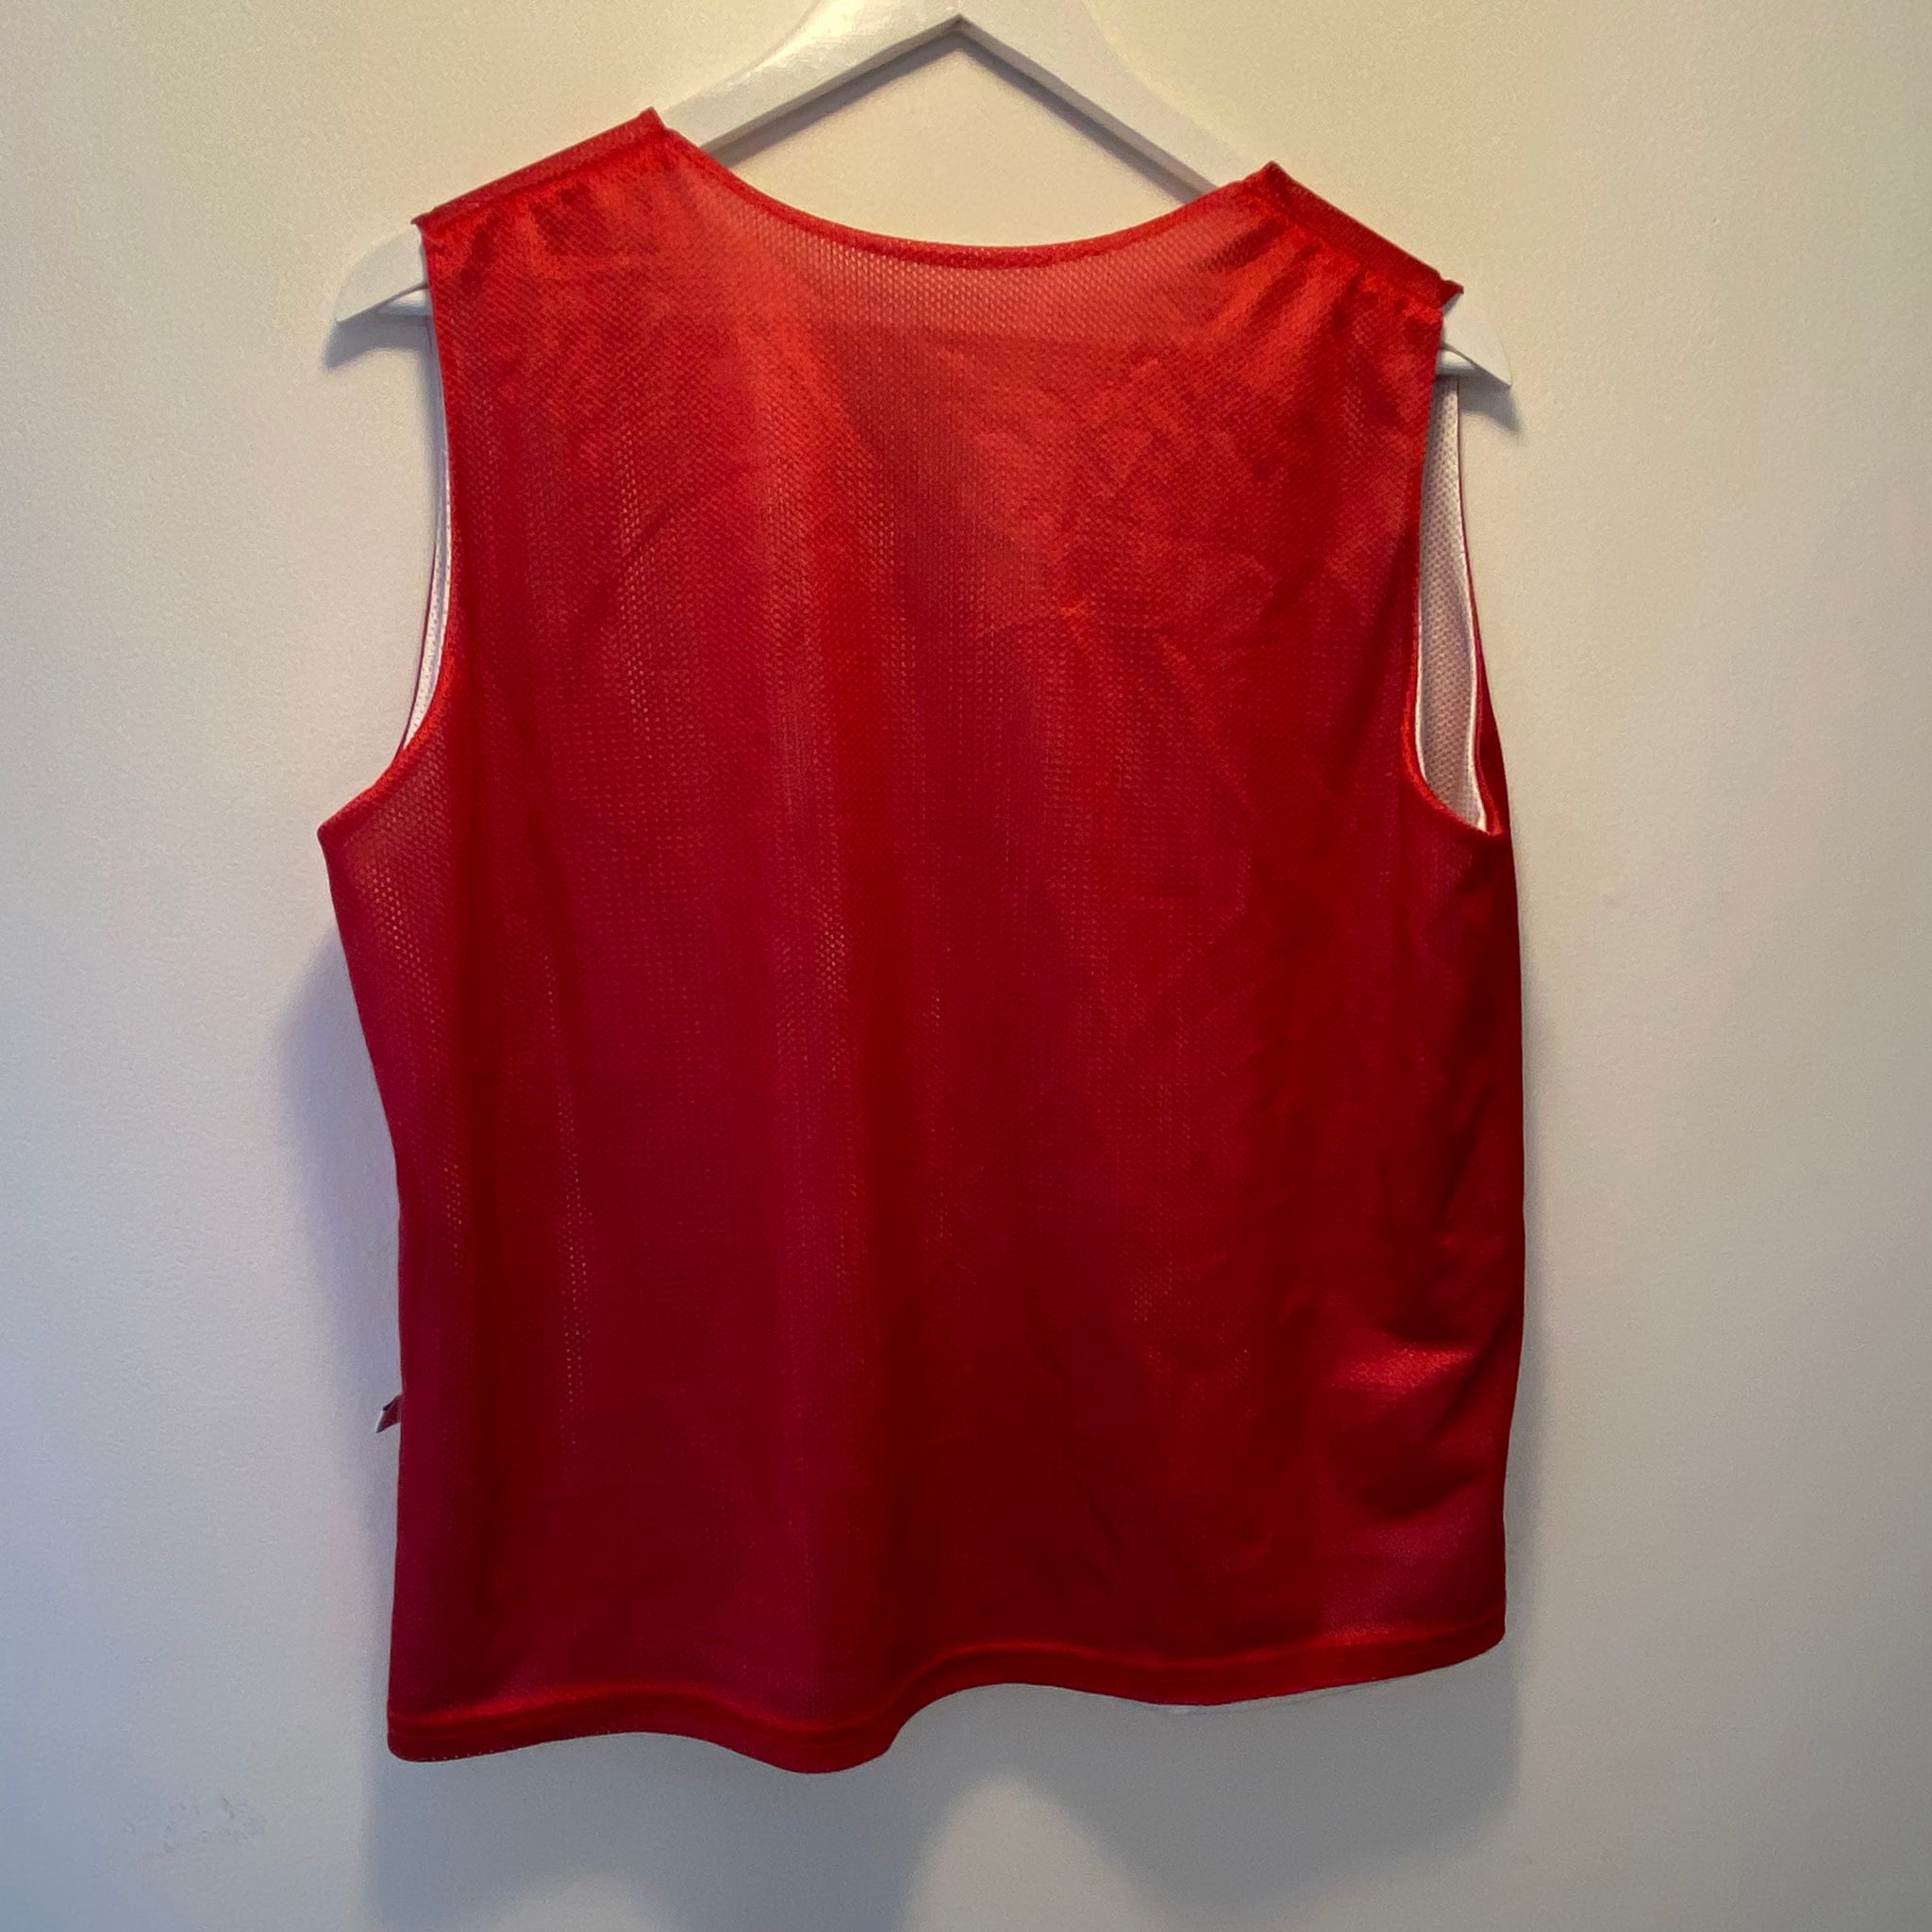 Red Jersey- M/L